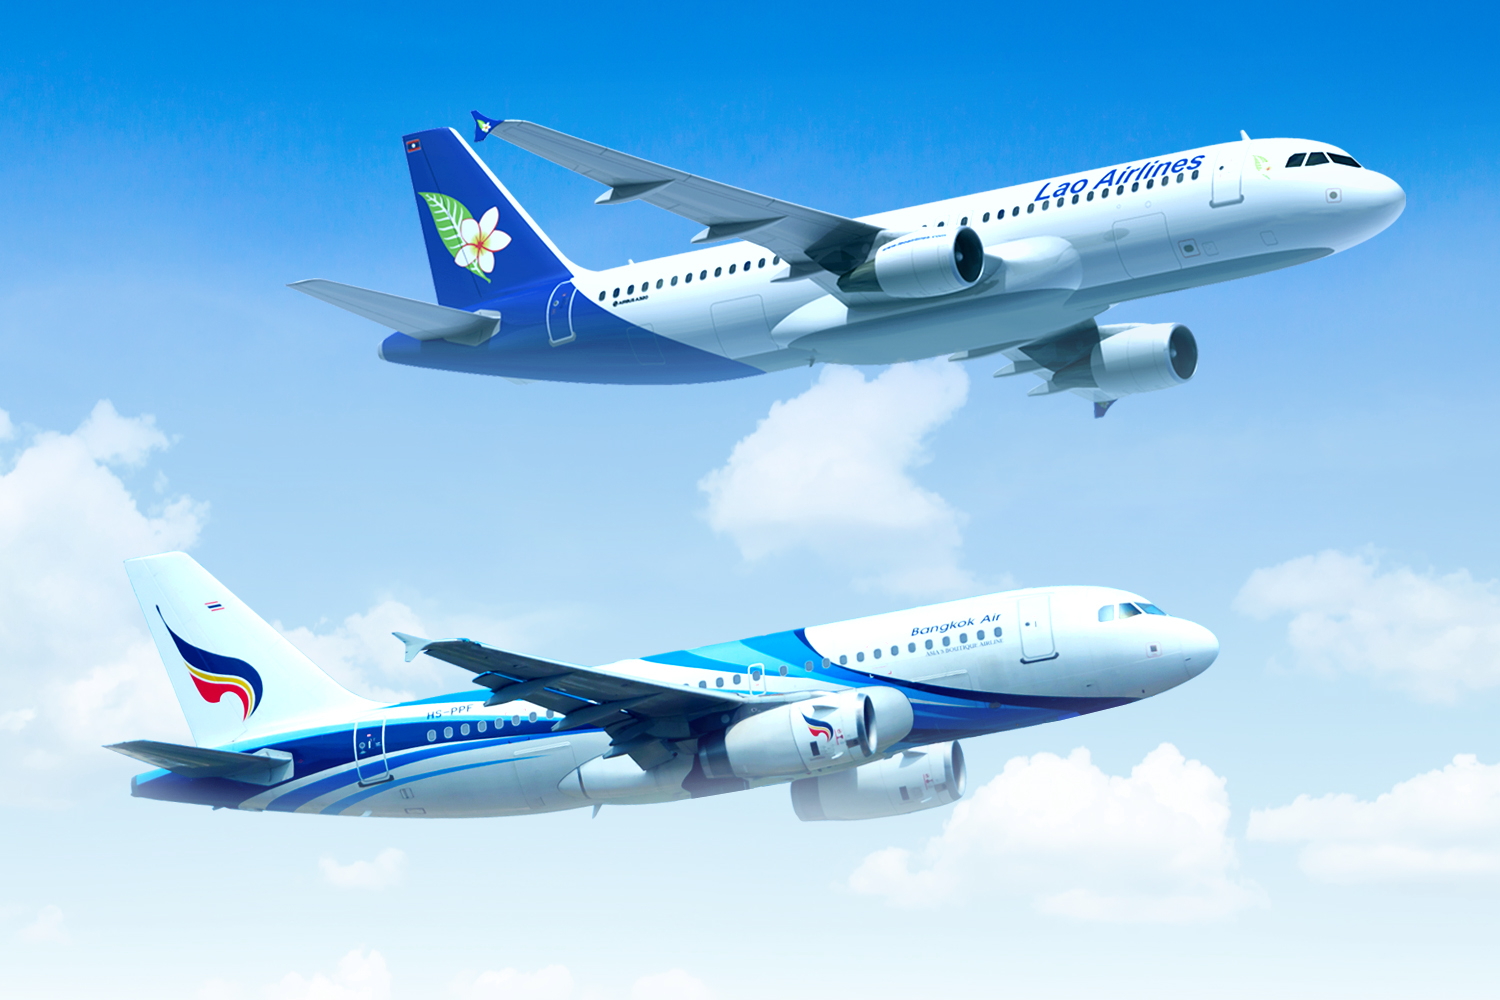 Lao Airlines (QV) and Bangkok Airways (PG) are now codesharing on select routes between Thailand and Lao PDR. Click to enlarge.